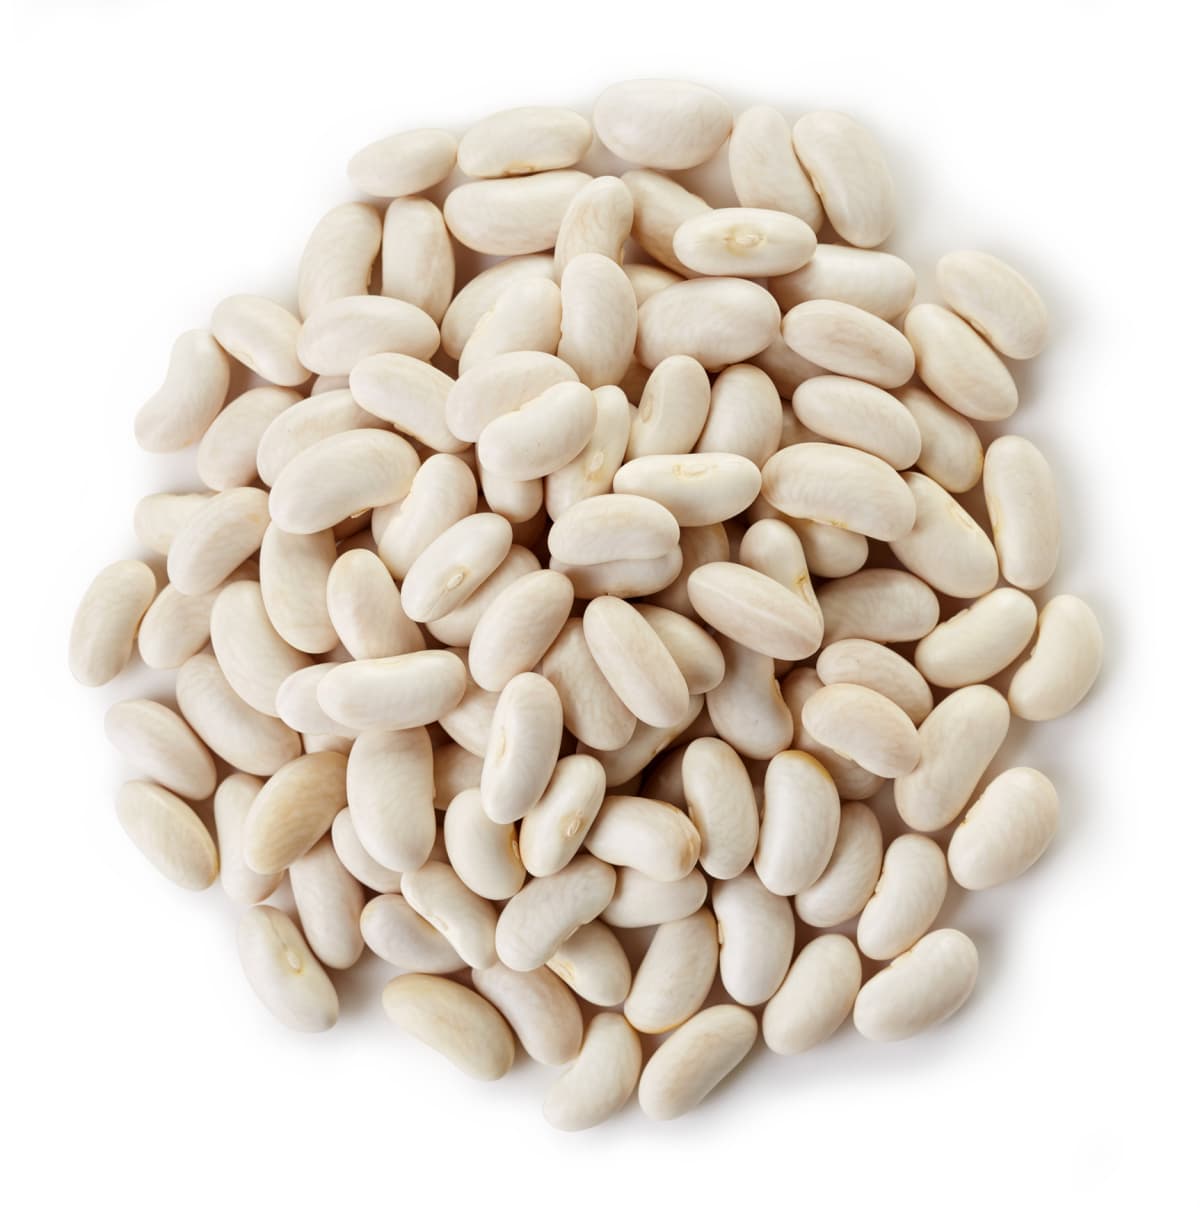 Circle of white beans isolated on white background